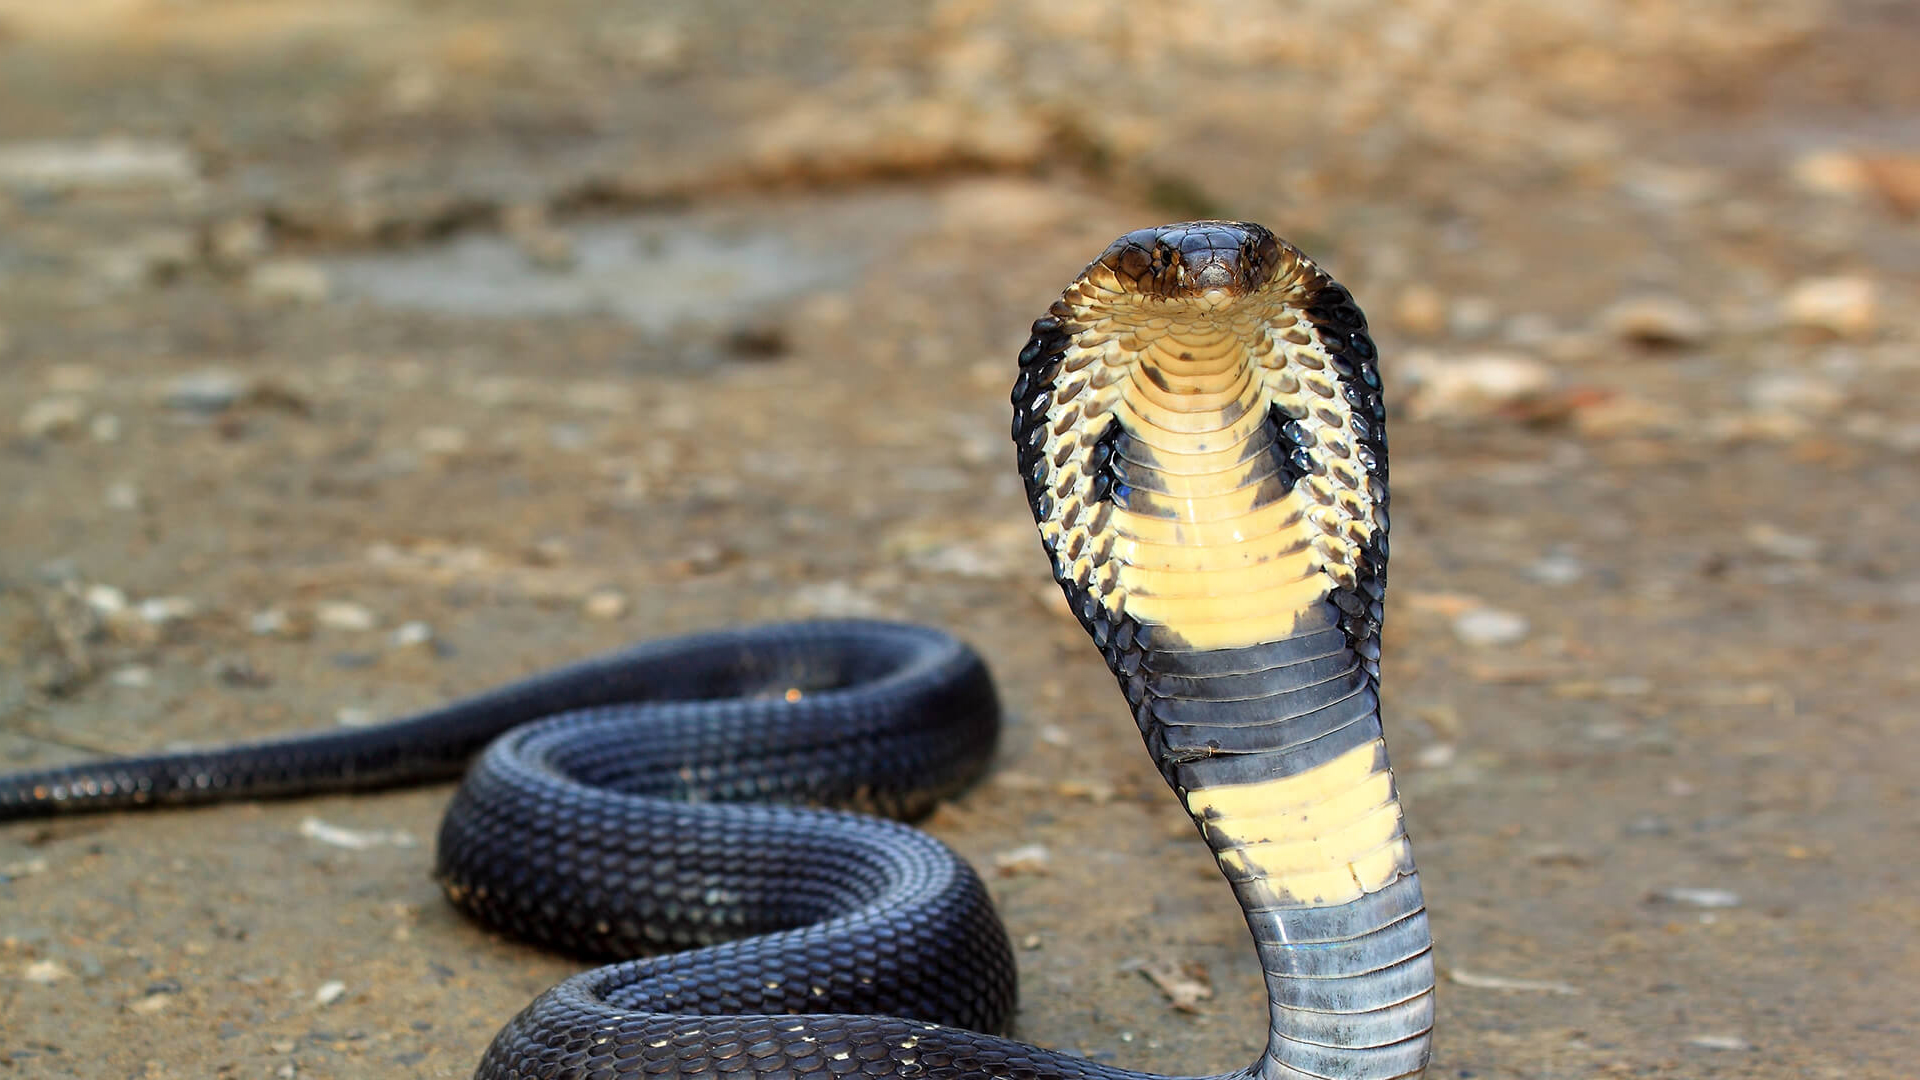 King cobra with head upright on brown dirt ground